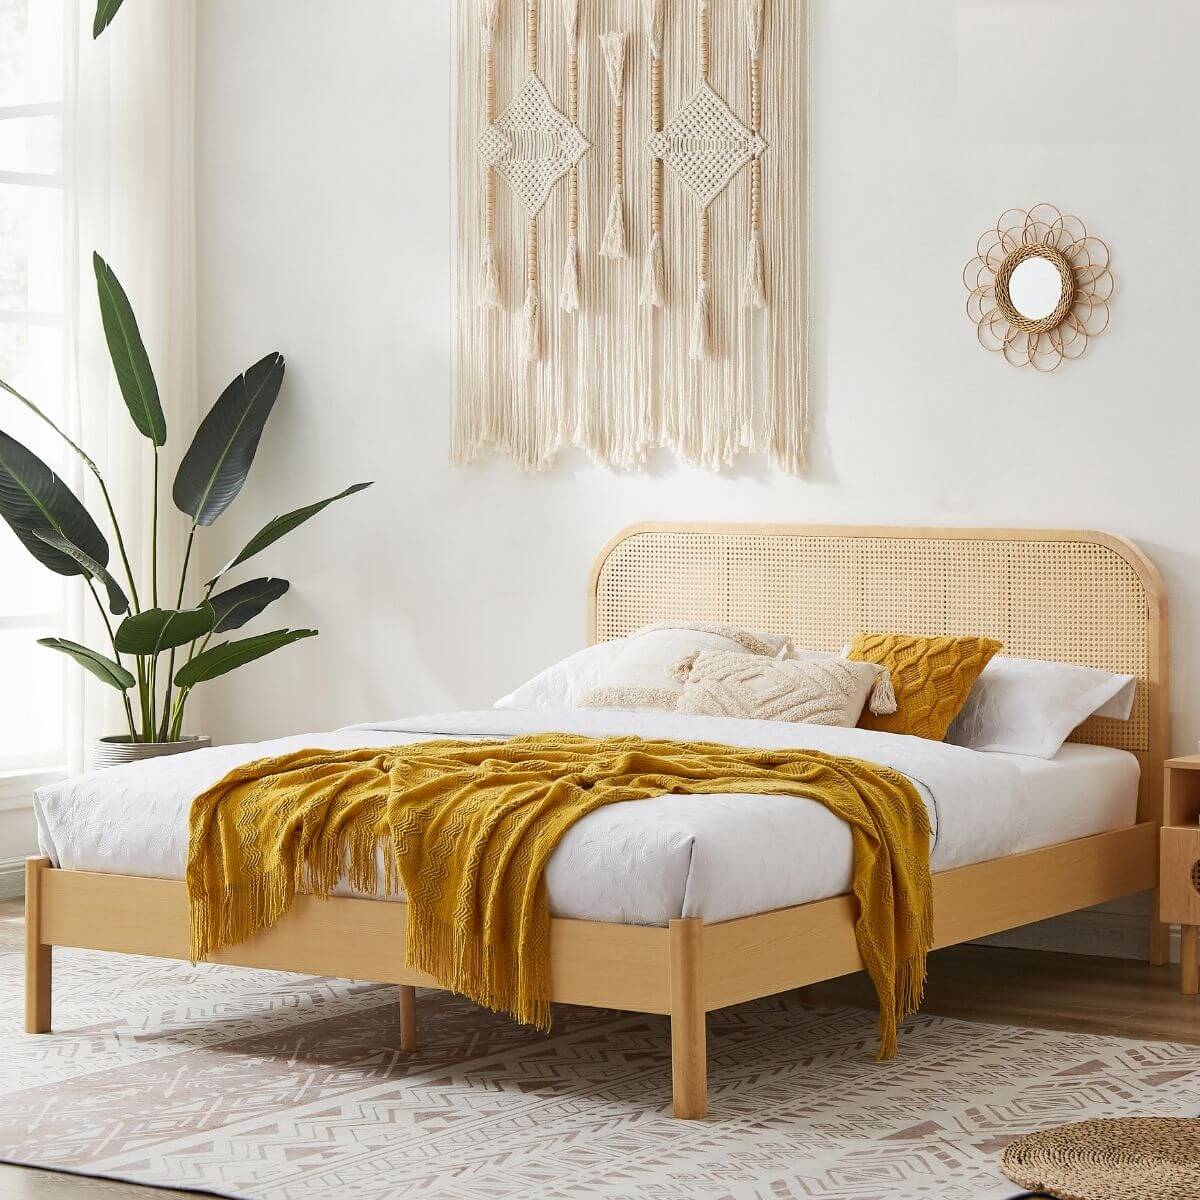 Lulu Bed Frame with Curved Rattan Bedhead - King-Upinteriors